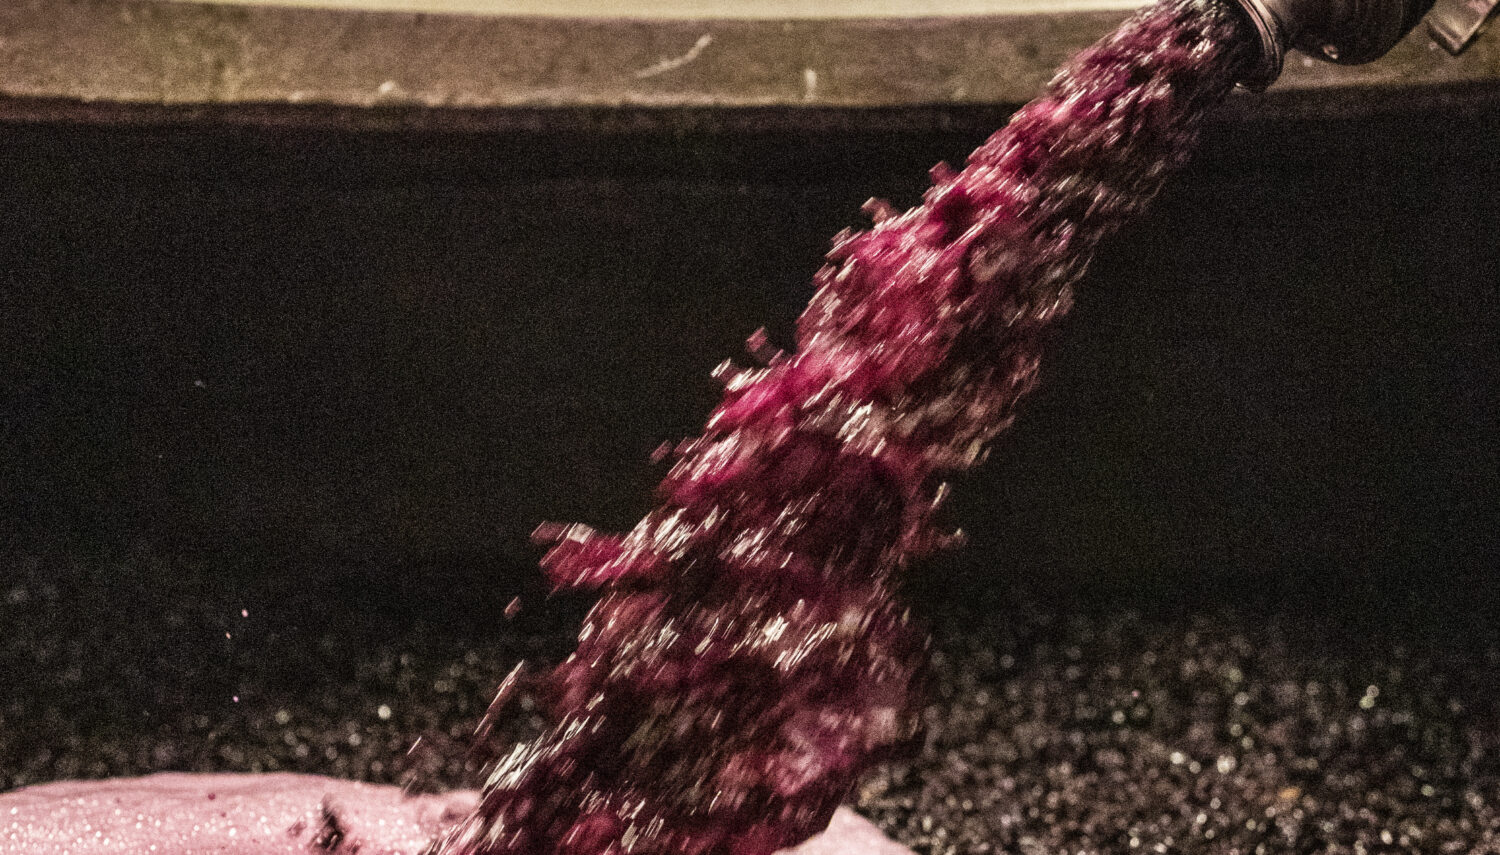 A metal nozzle sprays red grape juice into a bin with crushed grapes and juice.